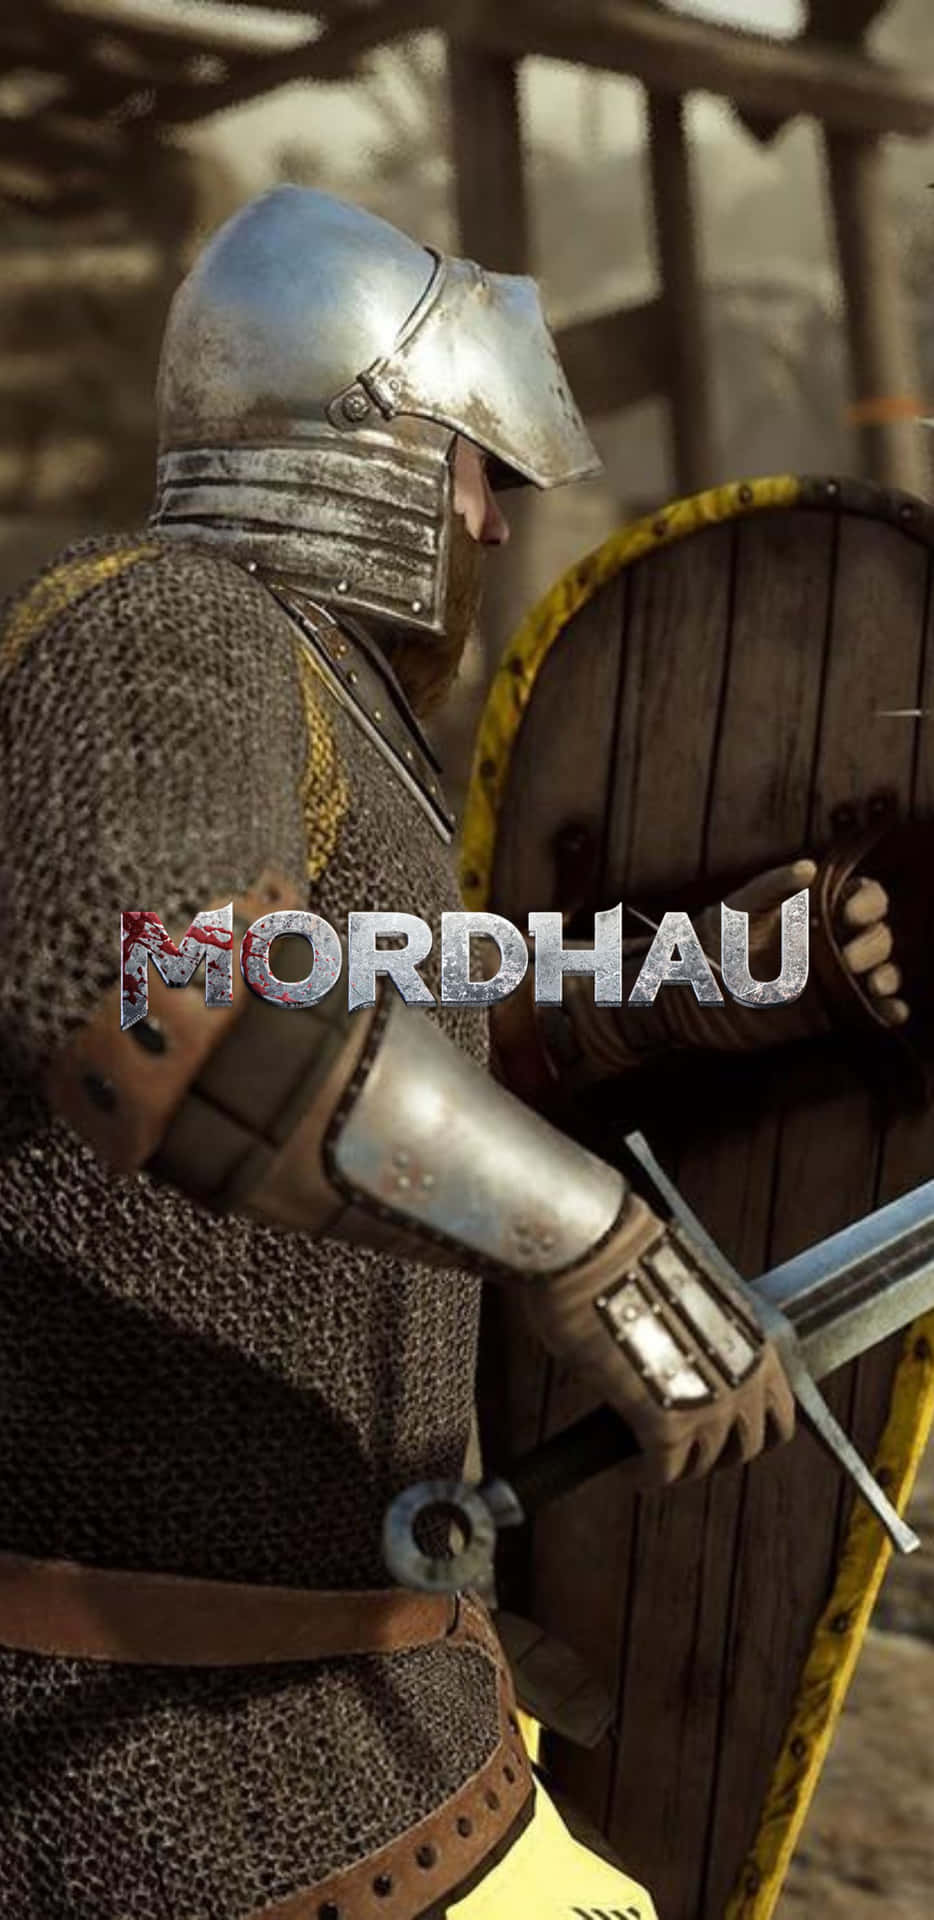 Experience the thrill of battle with Pixel 3xl Mordhau